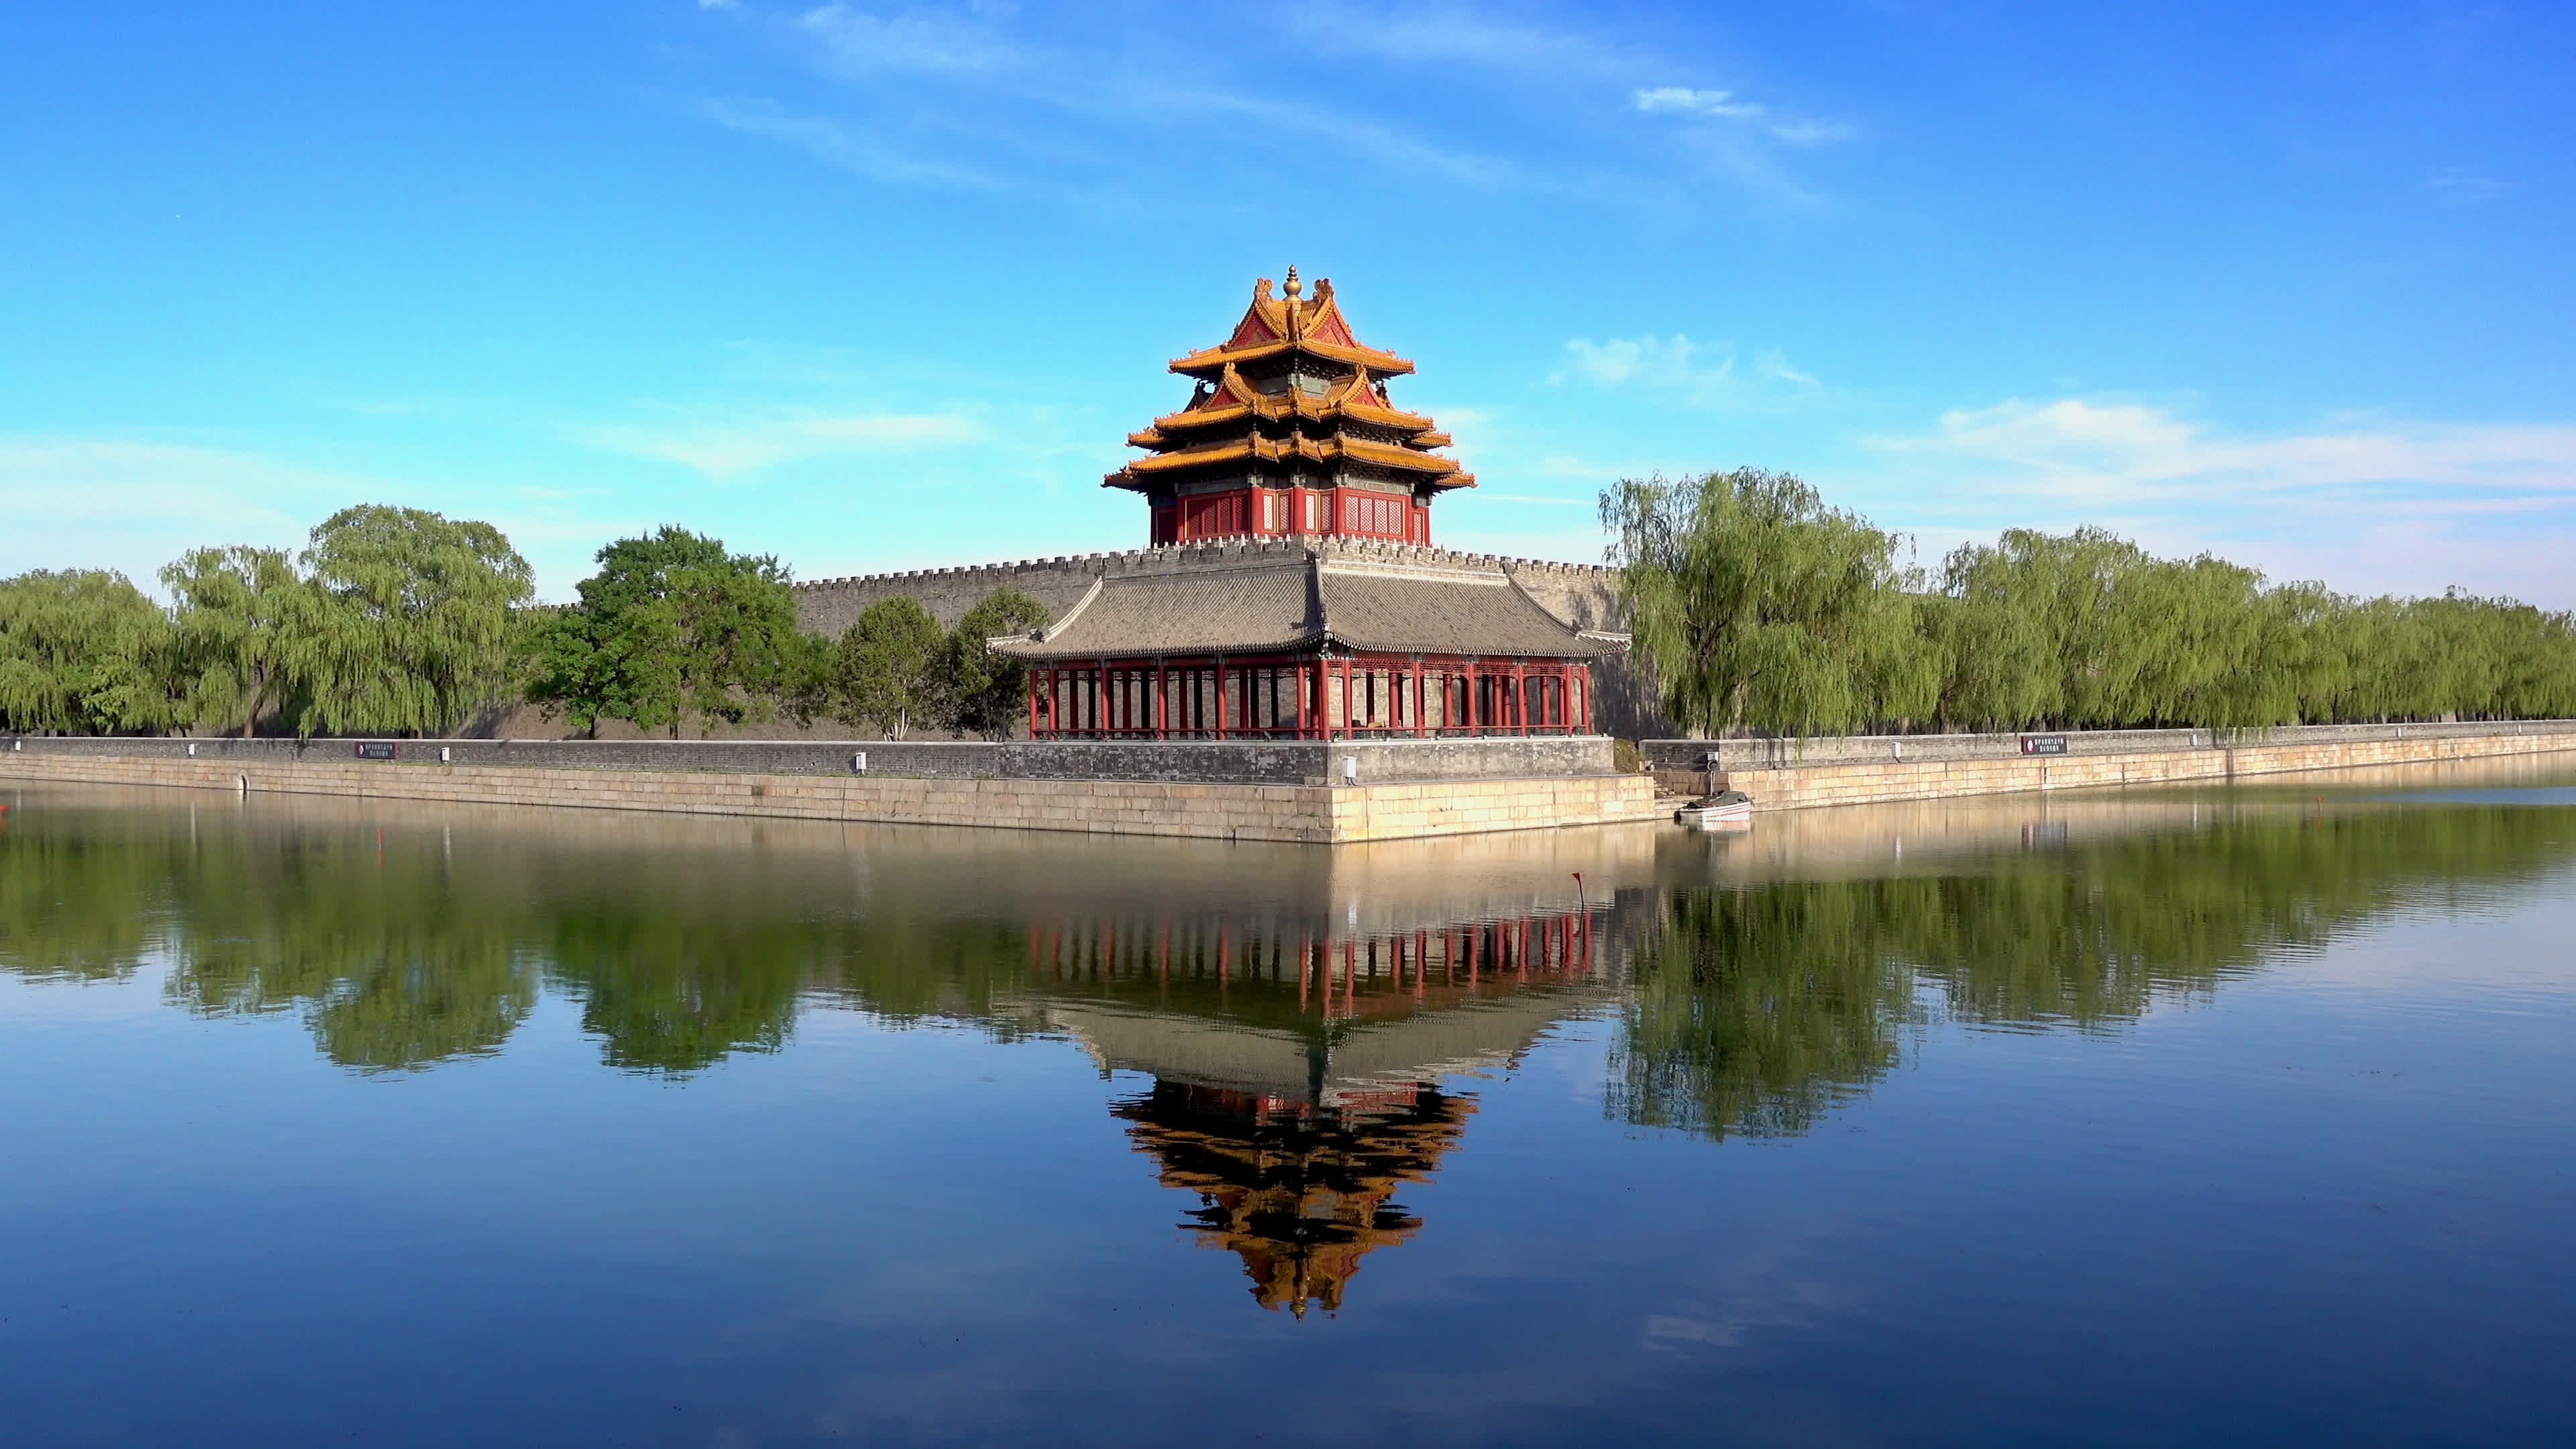 The Summer Palace, Corner tower, Imperial palace, Beijing's architectural marvel, 3840x2160 4K Desktop